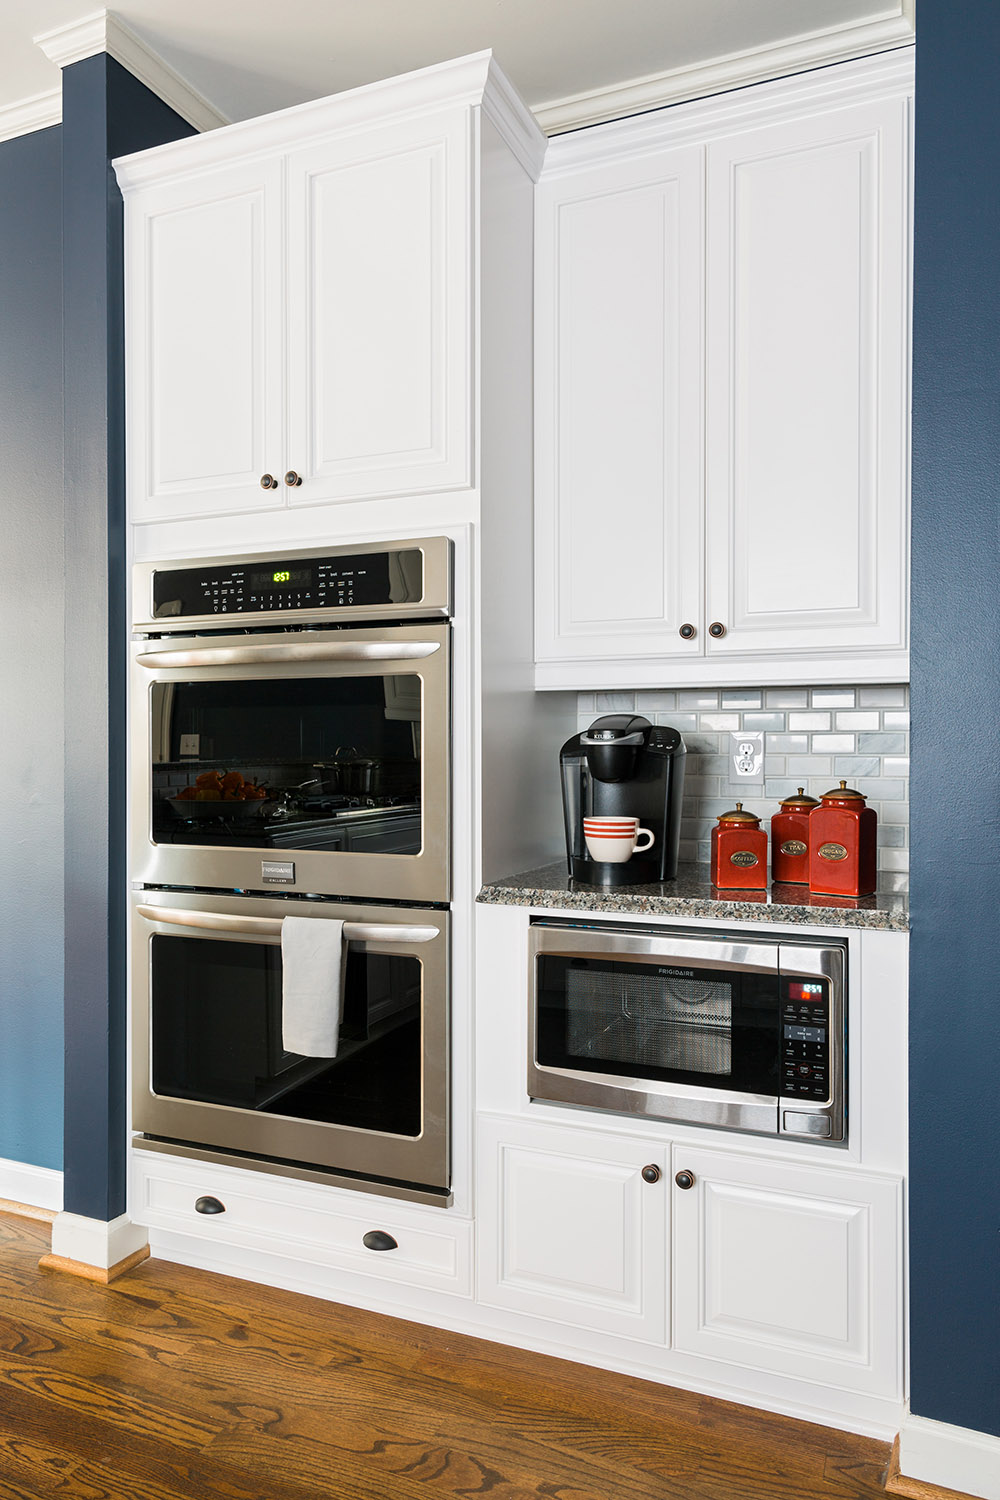 A wall with built-in double ovens and a built-in microwave.